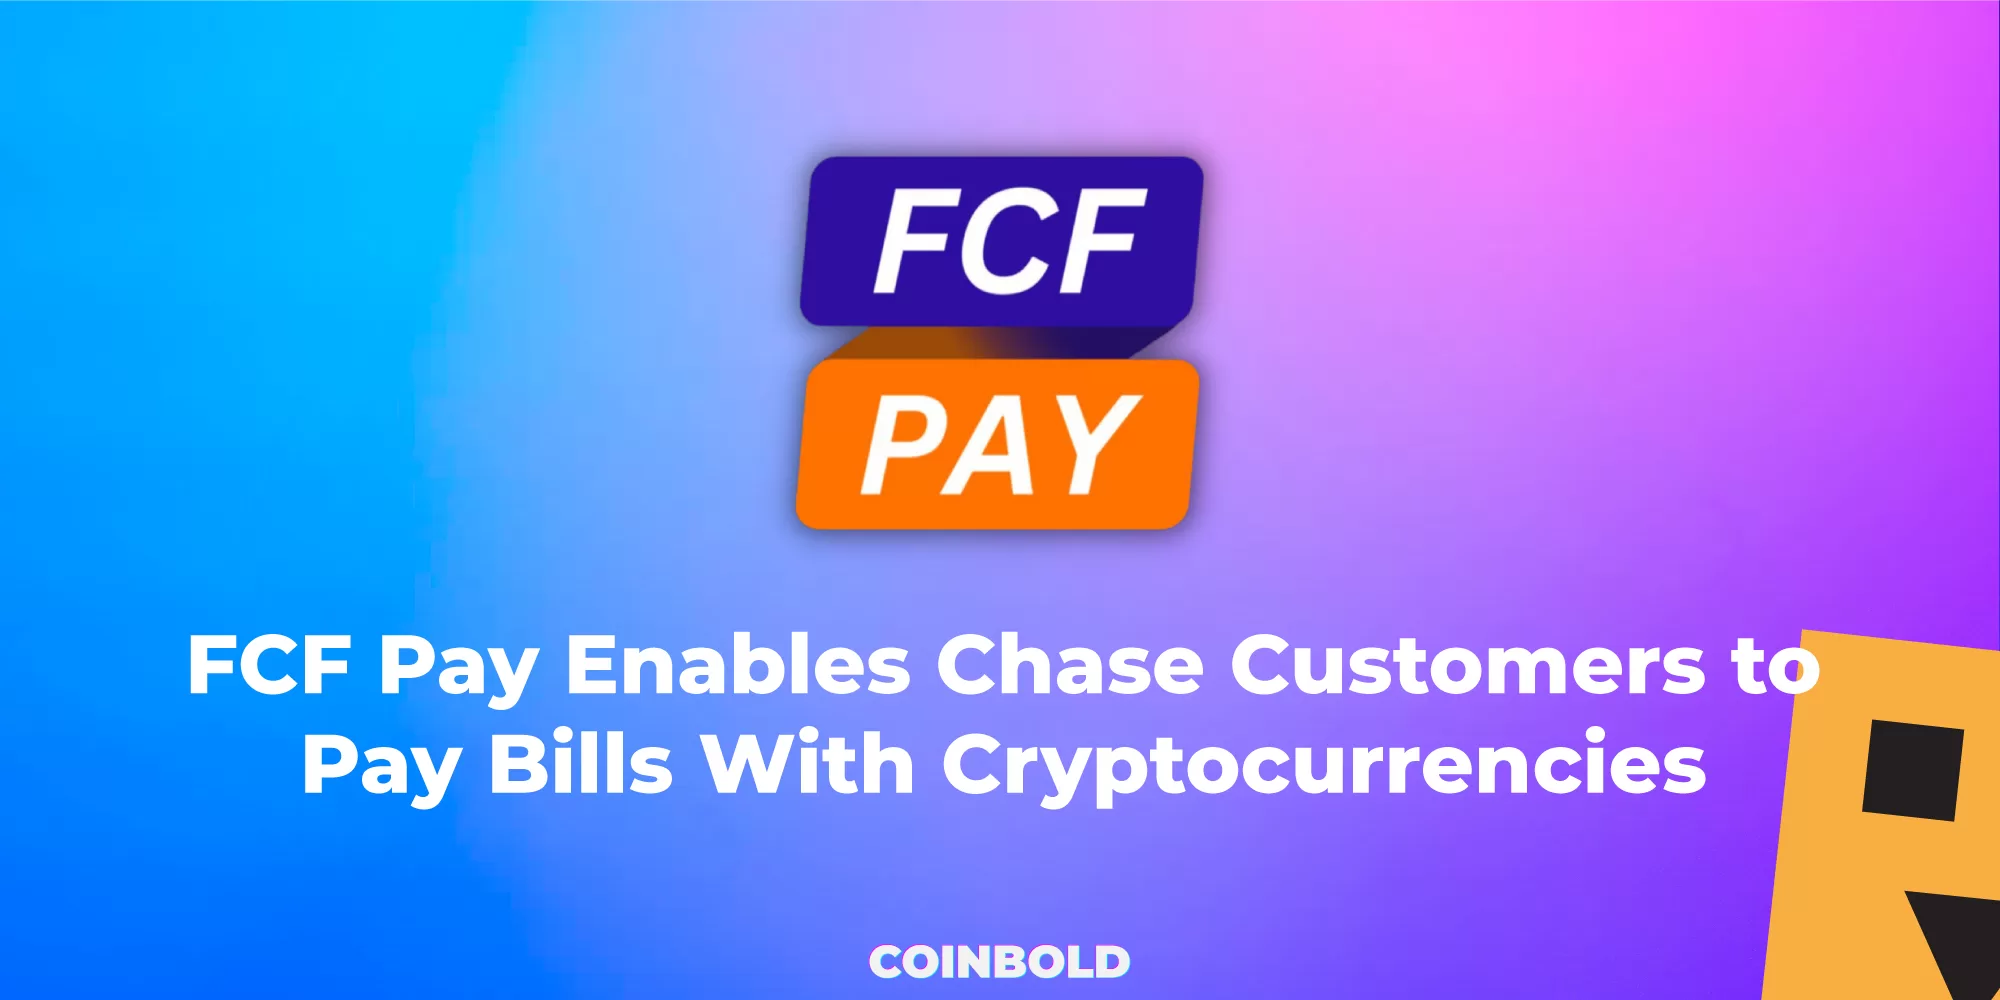 FCF Pay Enables Chase Customers to Pay Bills With Cryptocurrencies